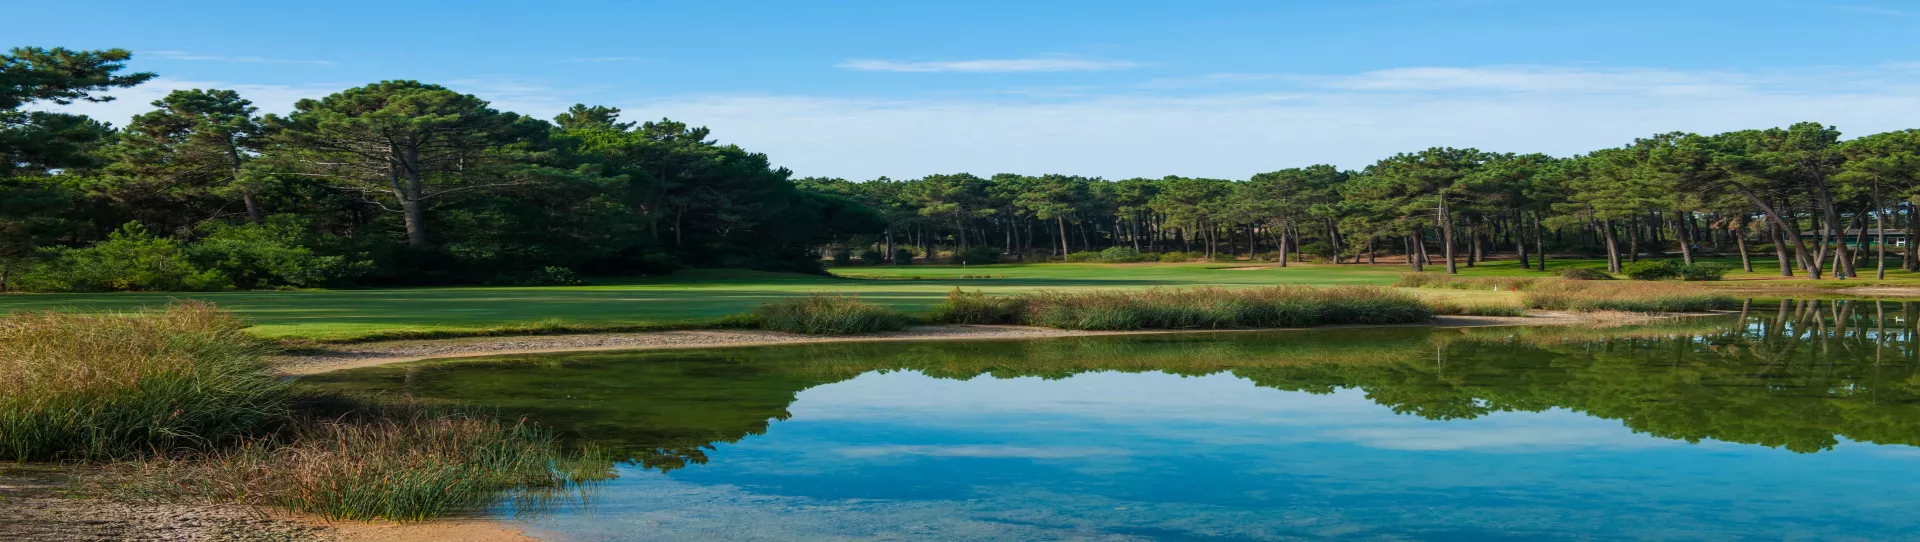 Portugal golf holidays - 4 Nights BB& 3 Golf Rounds - Photo 1